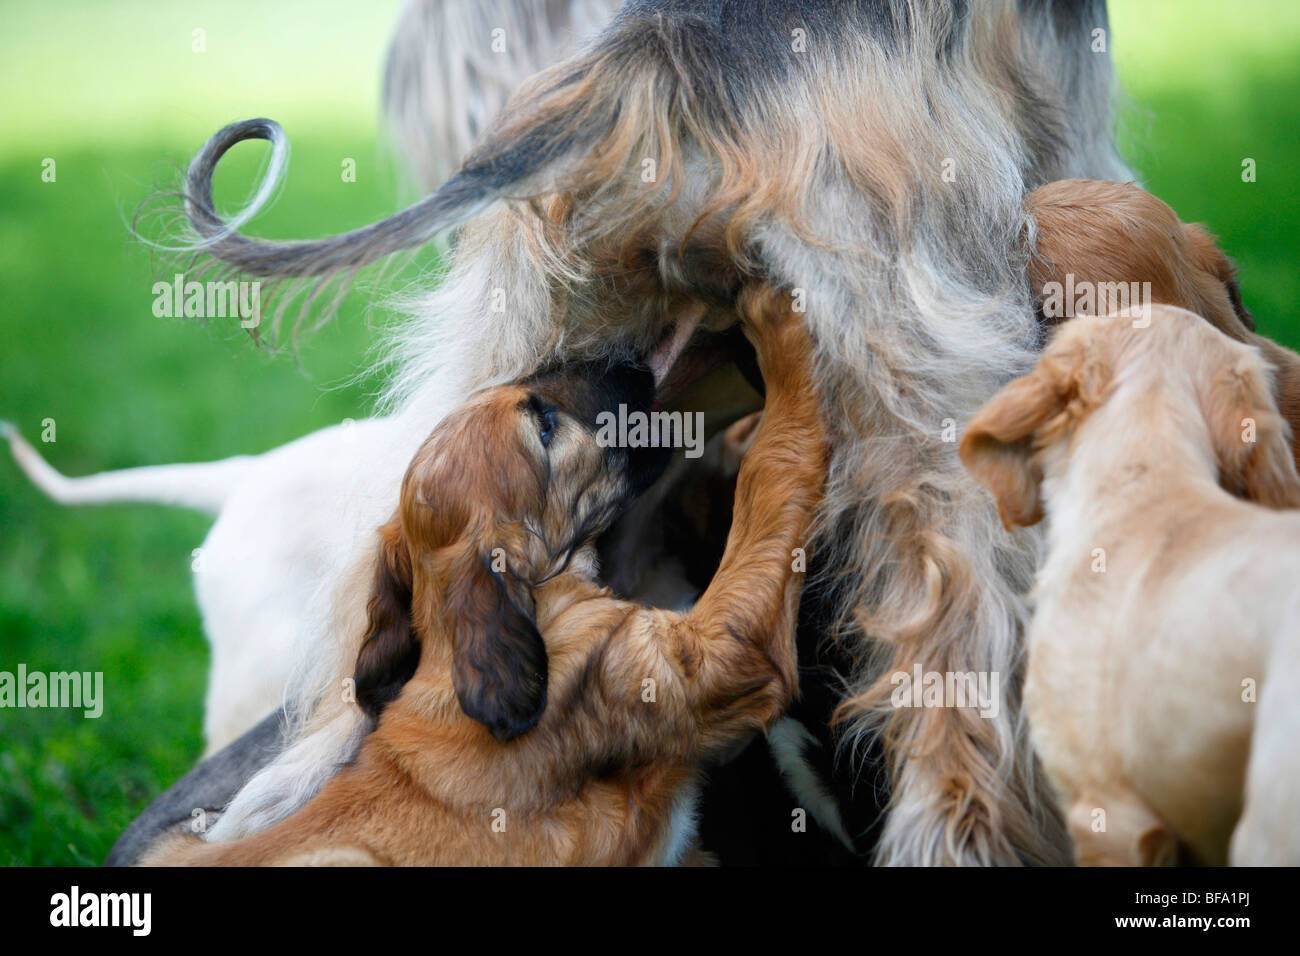 Afghanistan Hound, Afghan Hound (Canis lupus f. familiaris), mother suckeling five puppies, Germany Stock Photo